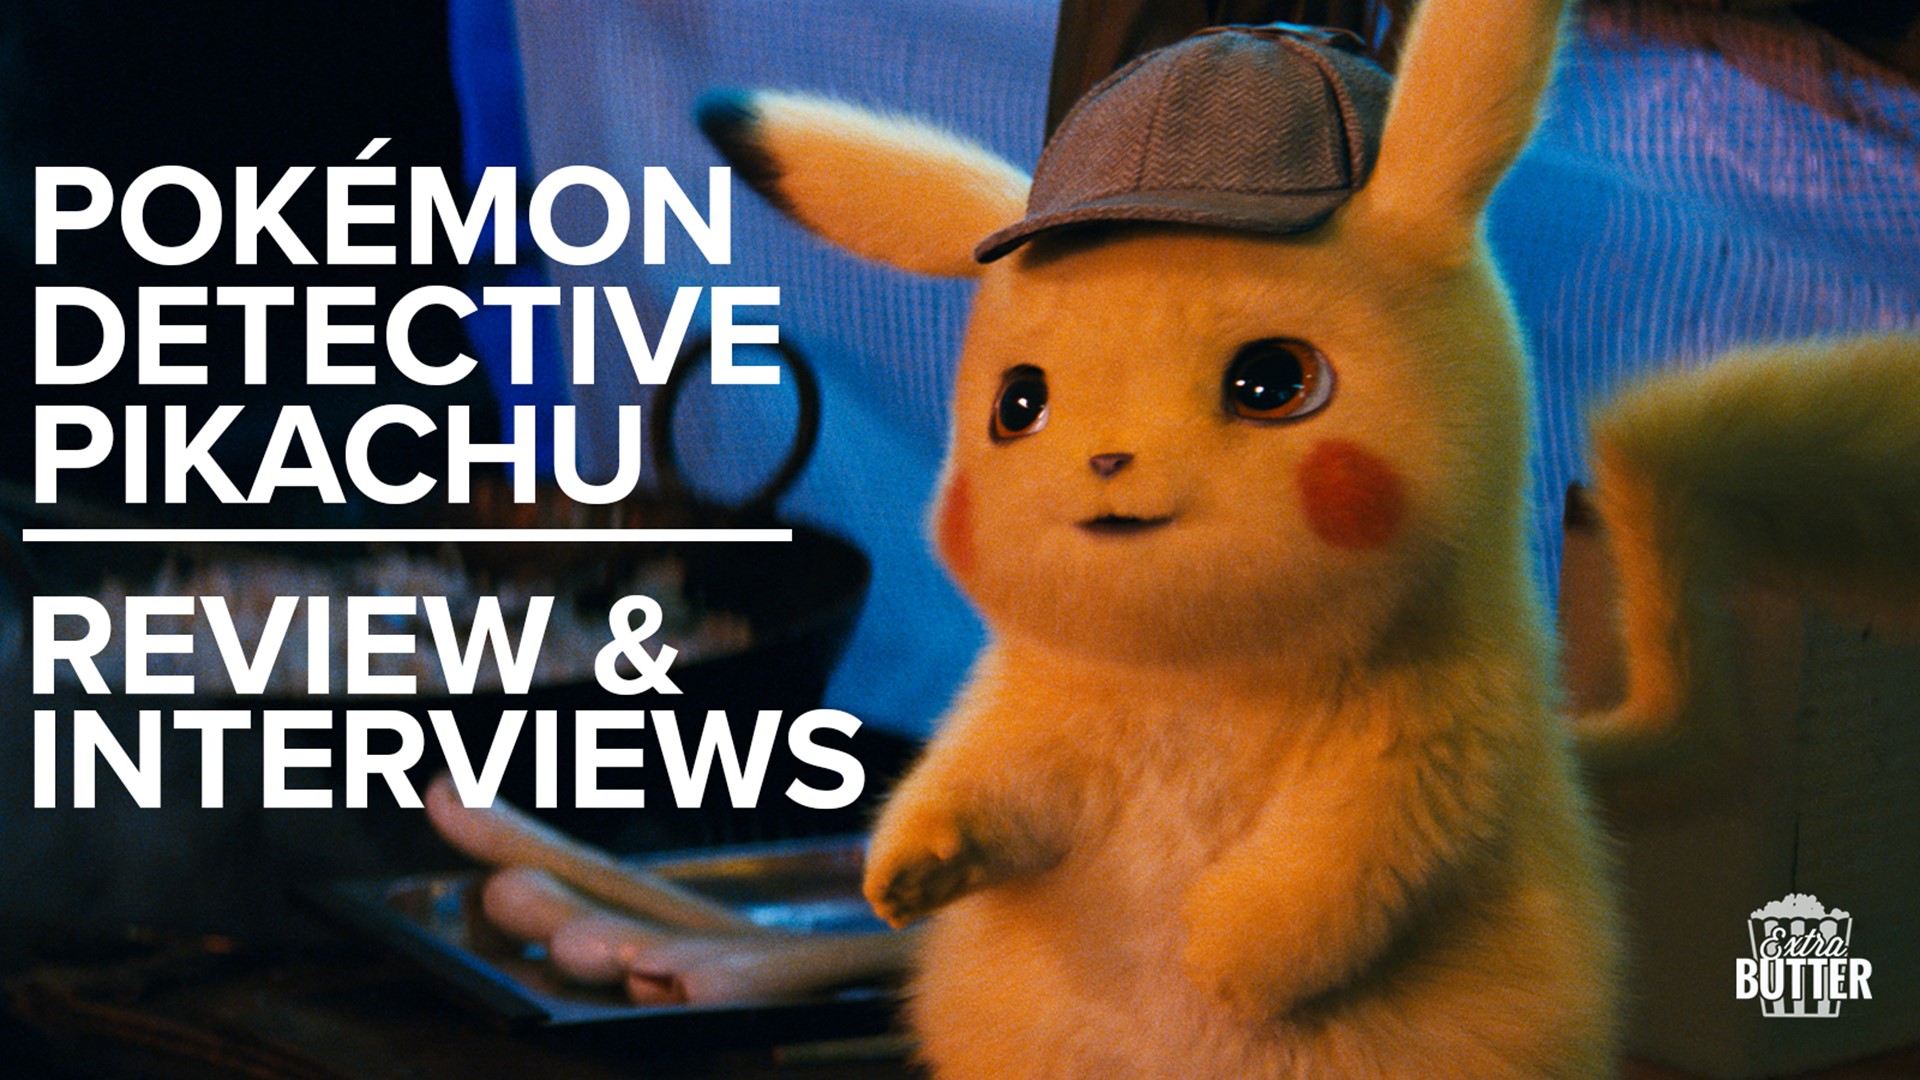 The new live-action Pokemon movie stars Ryan Reynolds. Extra Butter reviews the film and Mariaagloriaa interviews Reynolds, Justice Smith, Kathryn Newton, and Rob Letterman.